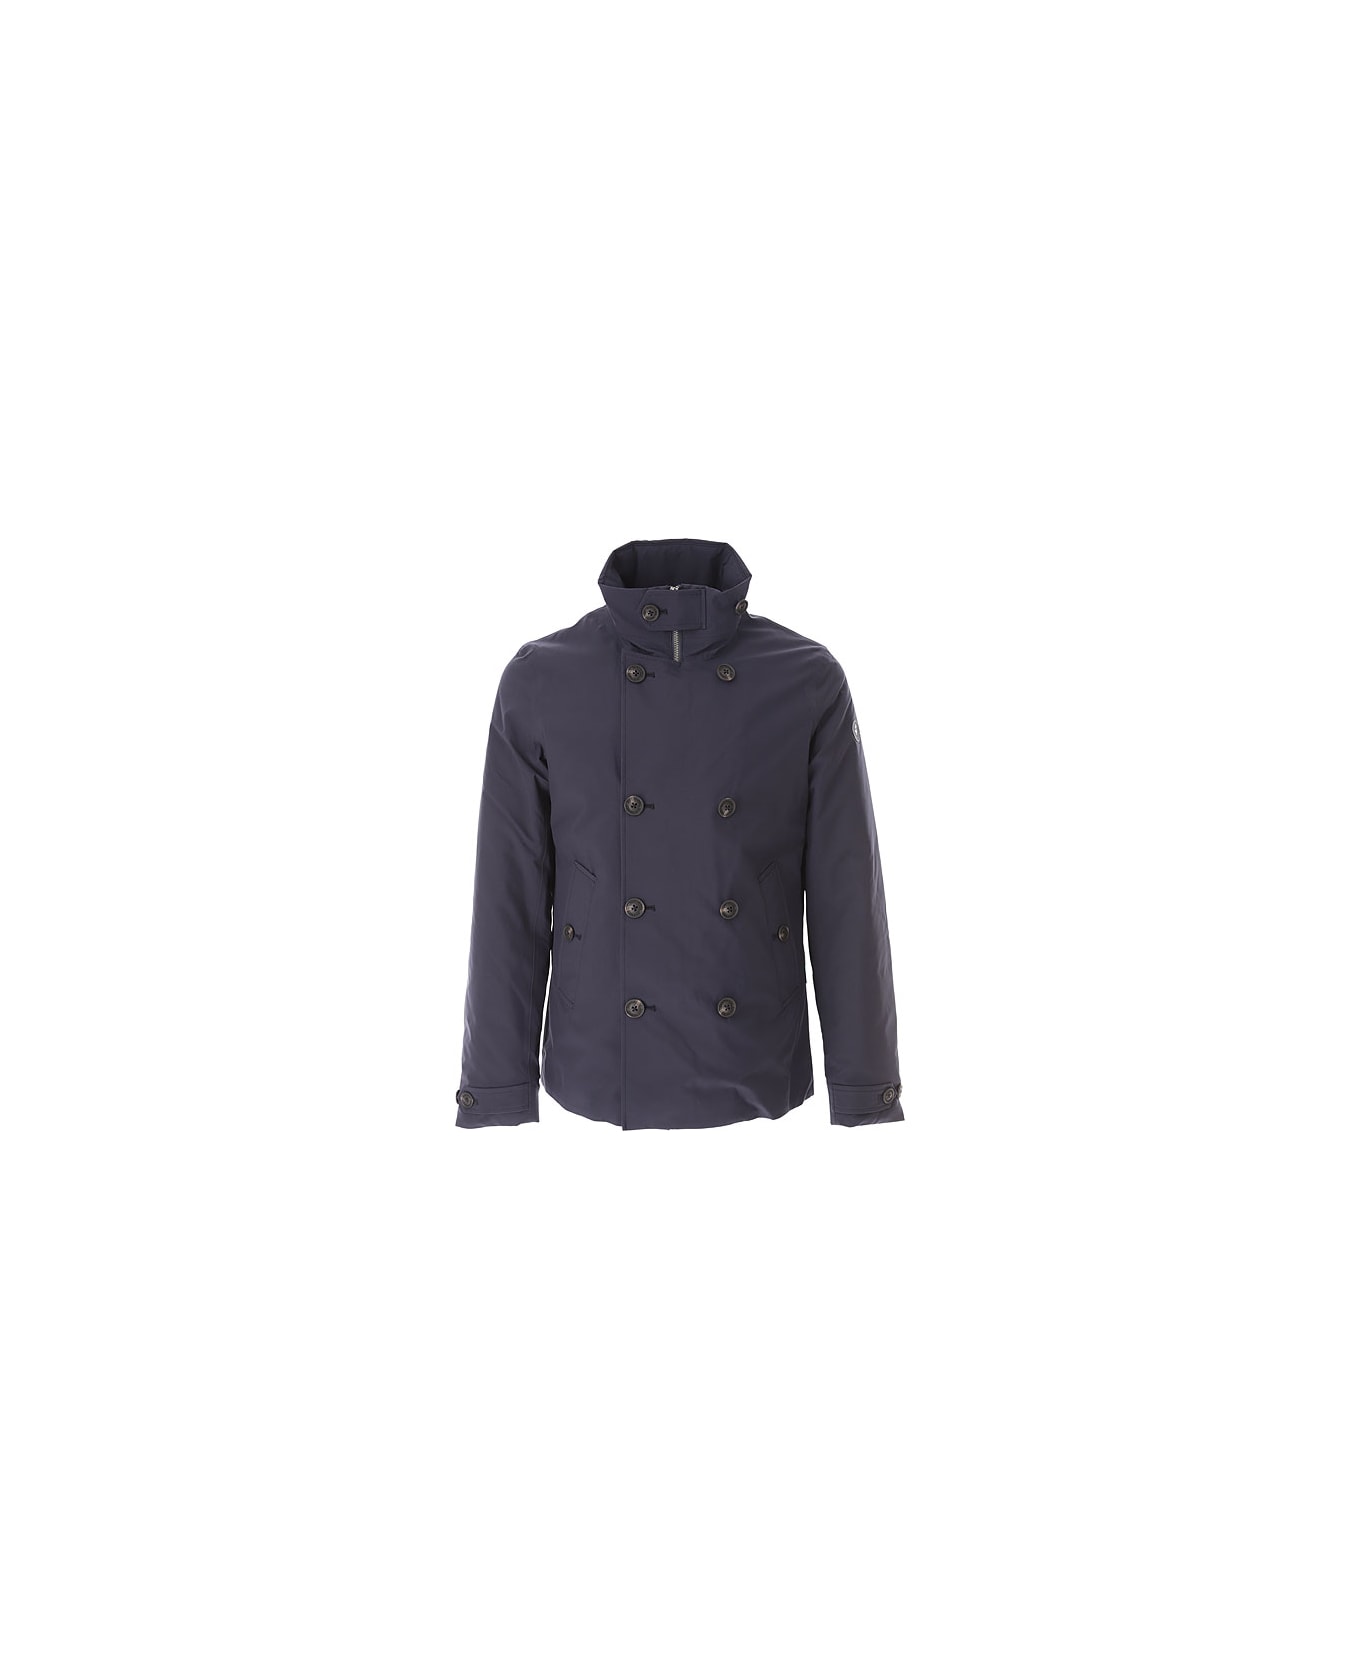 Save the Duck Cybe Jacket - Nero コート